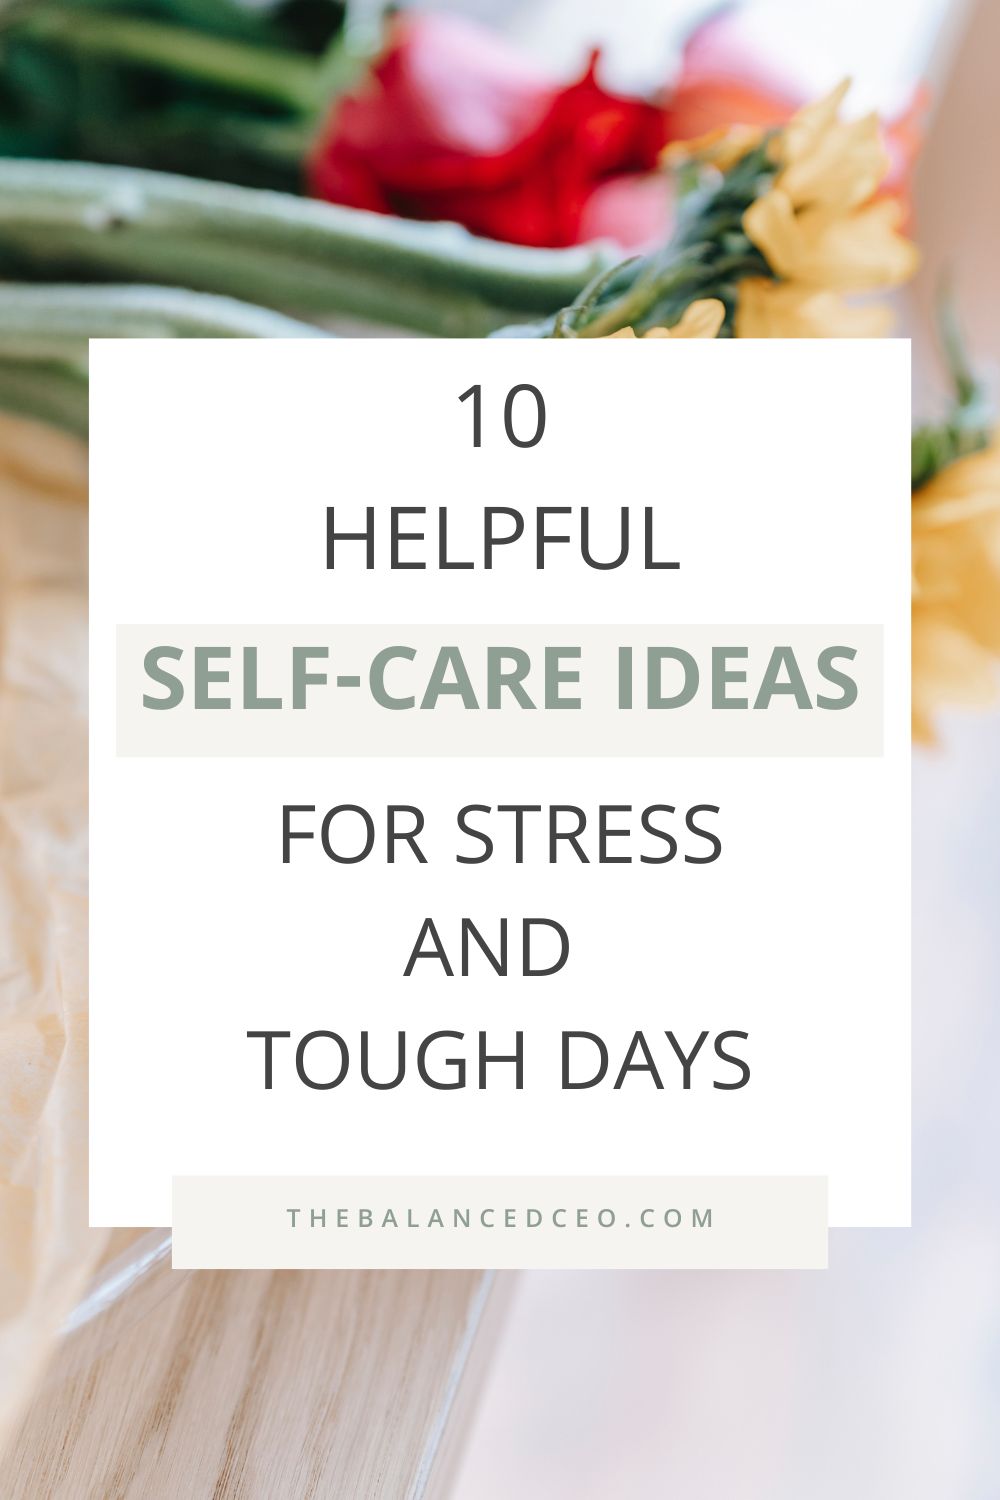 10 Helpful Self-Care Ideas for Stress and Tough Days